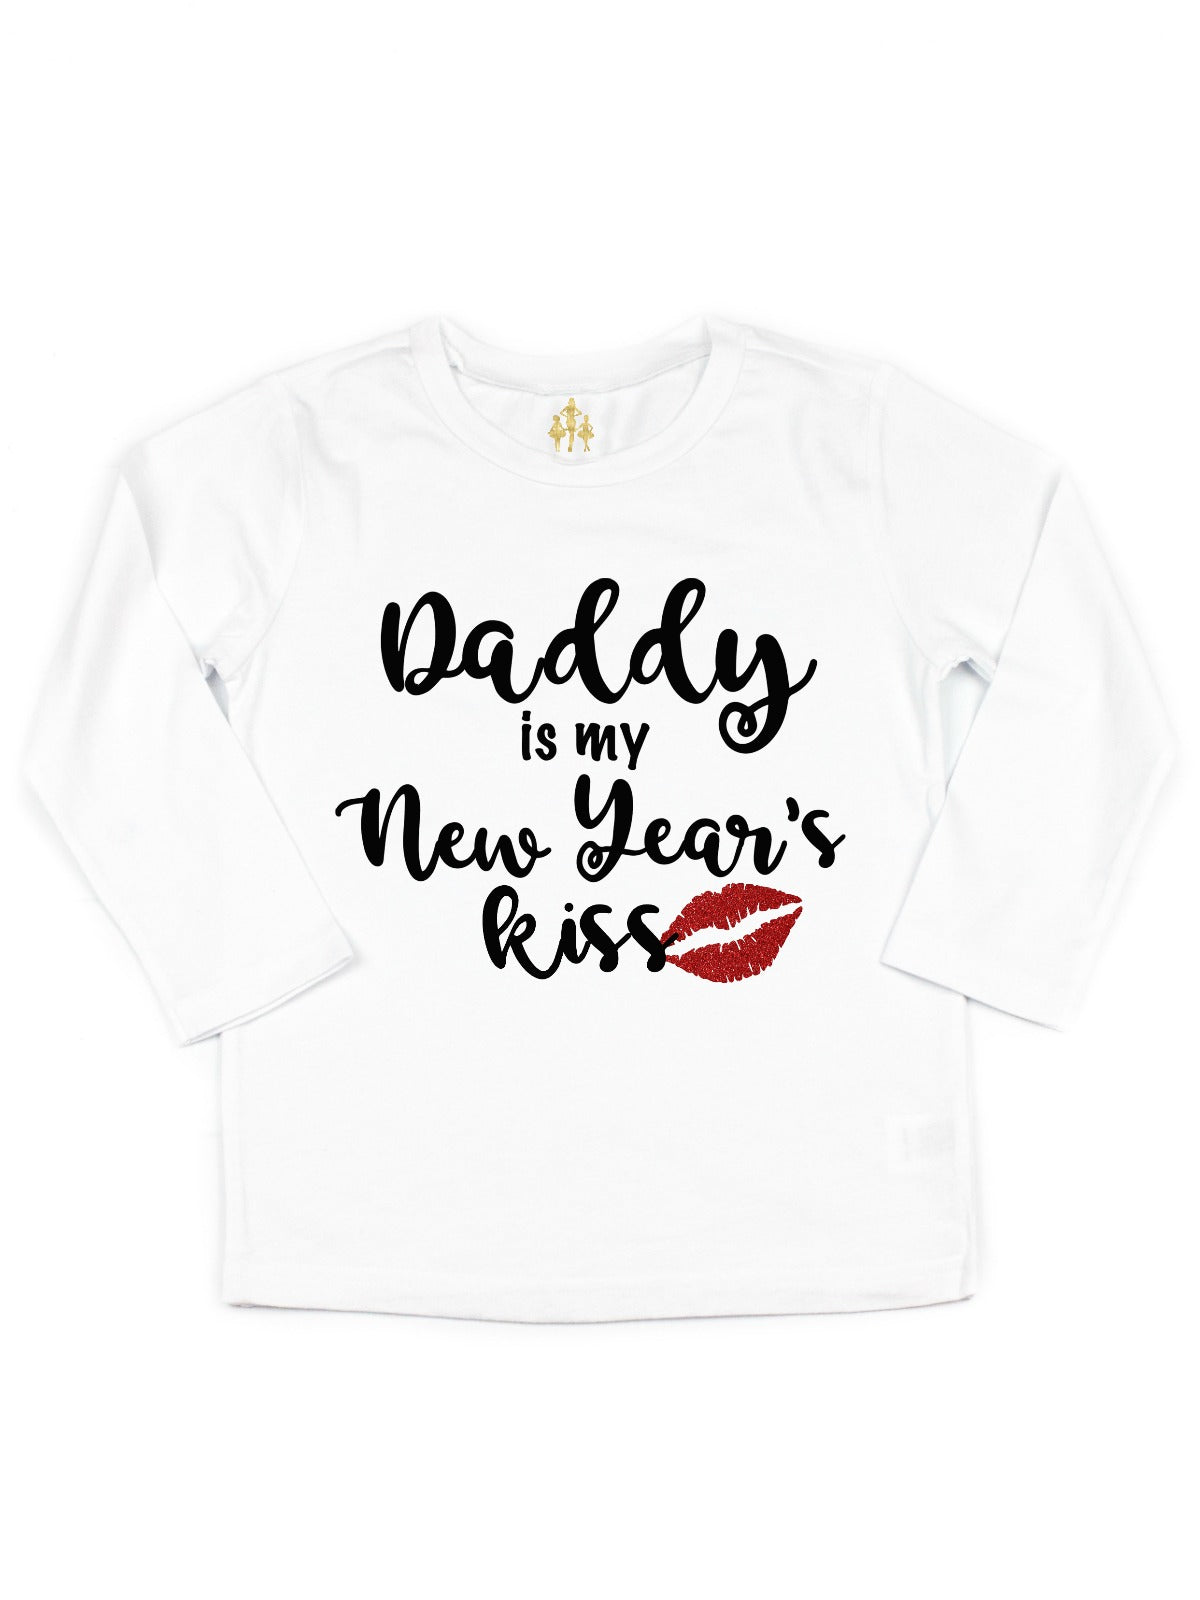 daddy is my new year's kiss tutu outfit